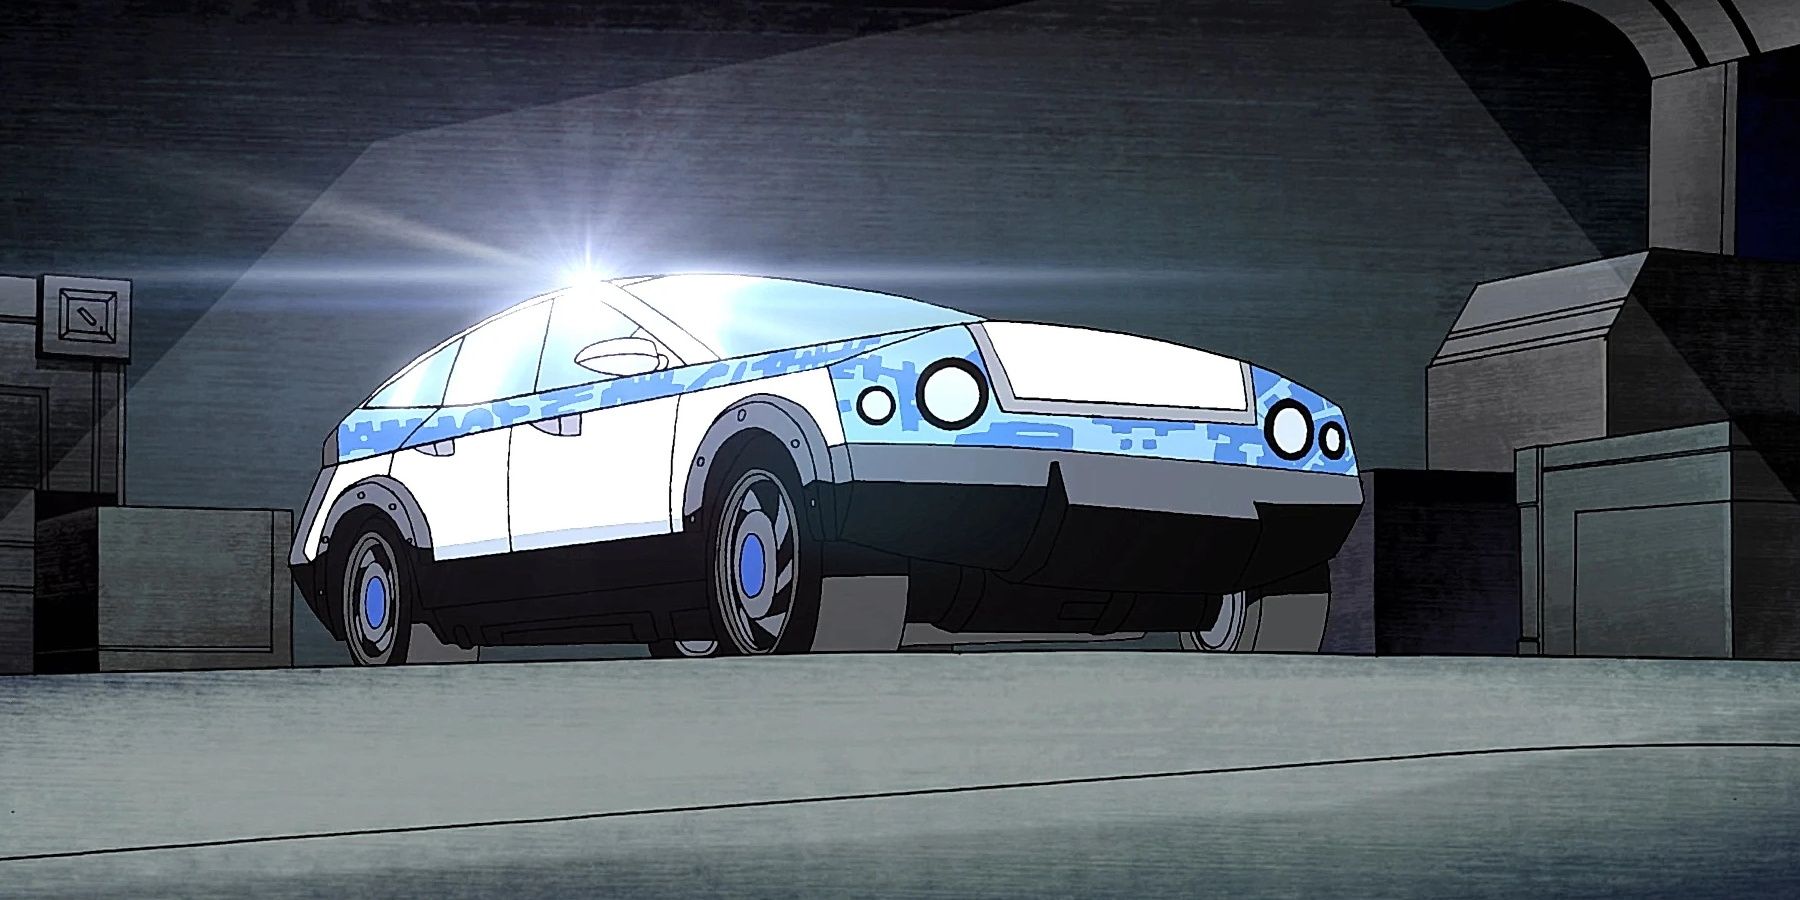 teen-titans-t-car-featured-image Cropped